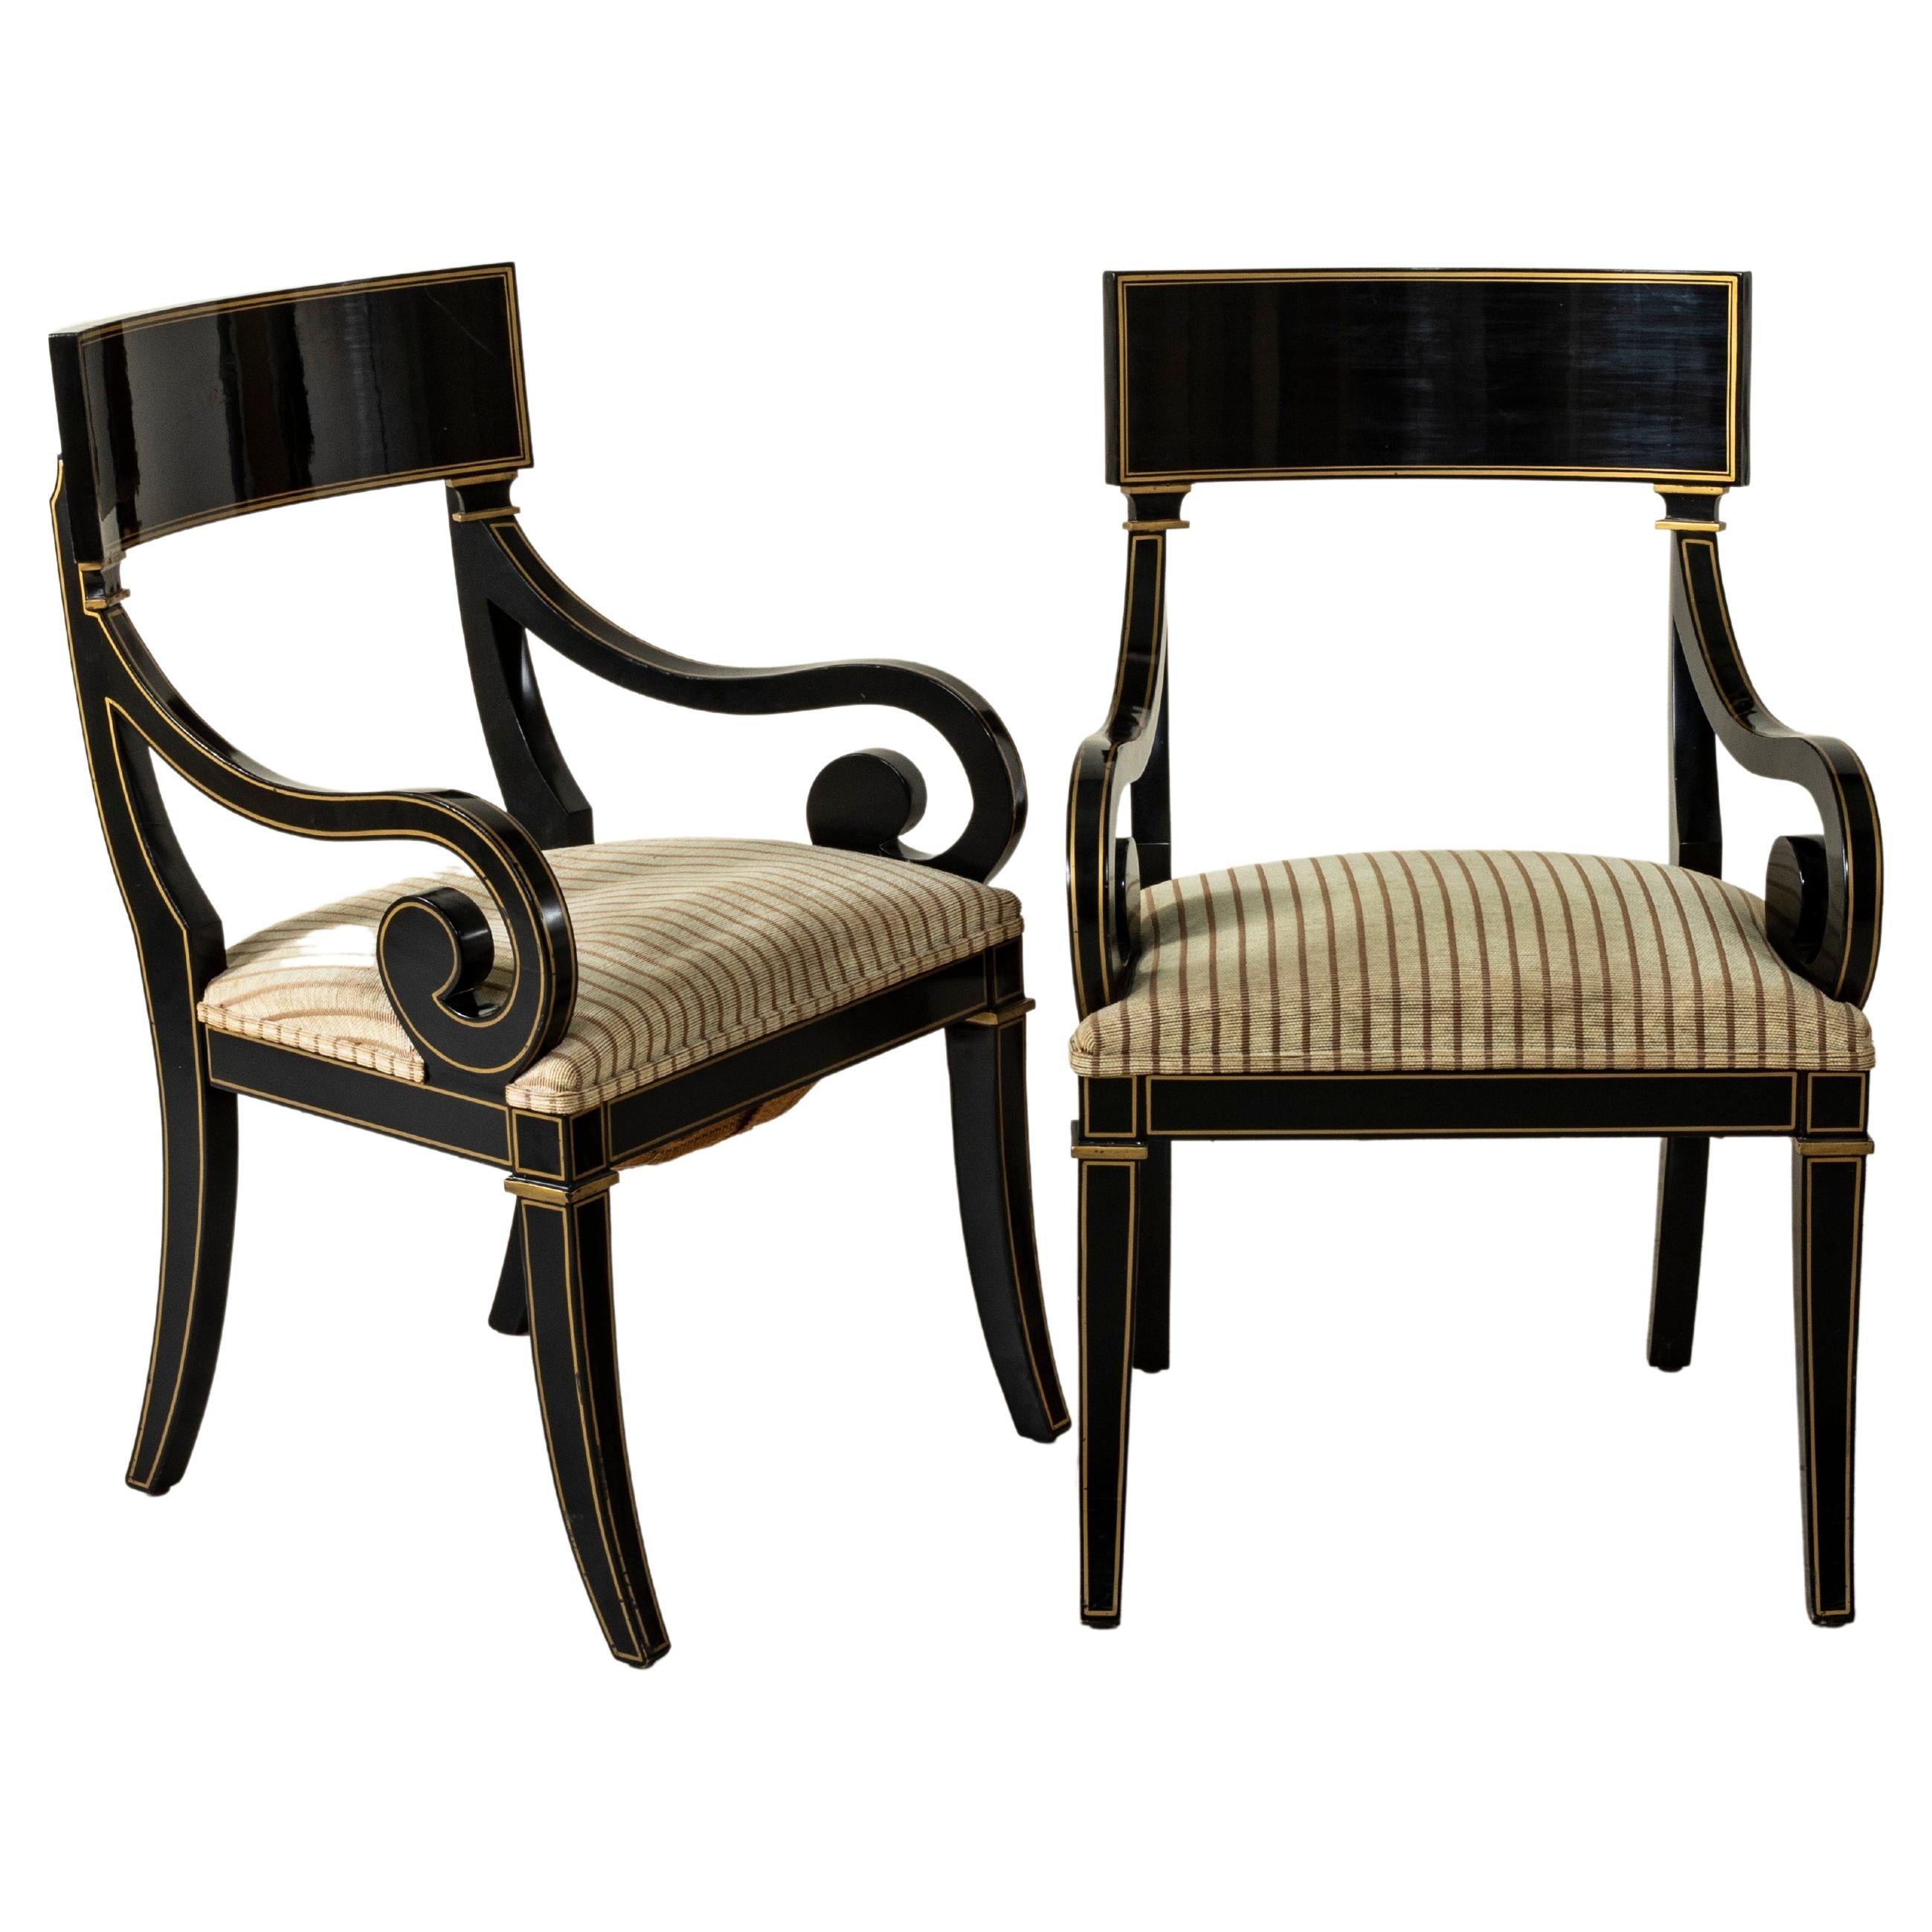 Pair of 20th Century French Restauration Style Painted Black and Gold Armchairs